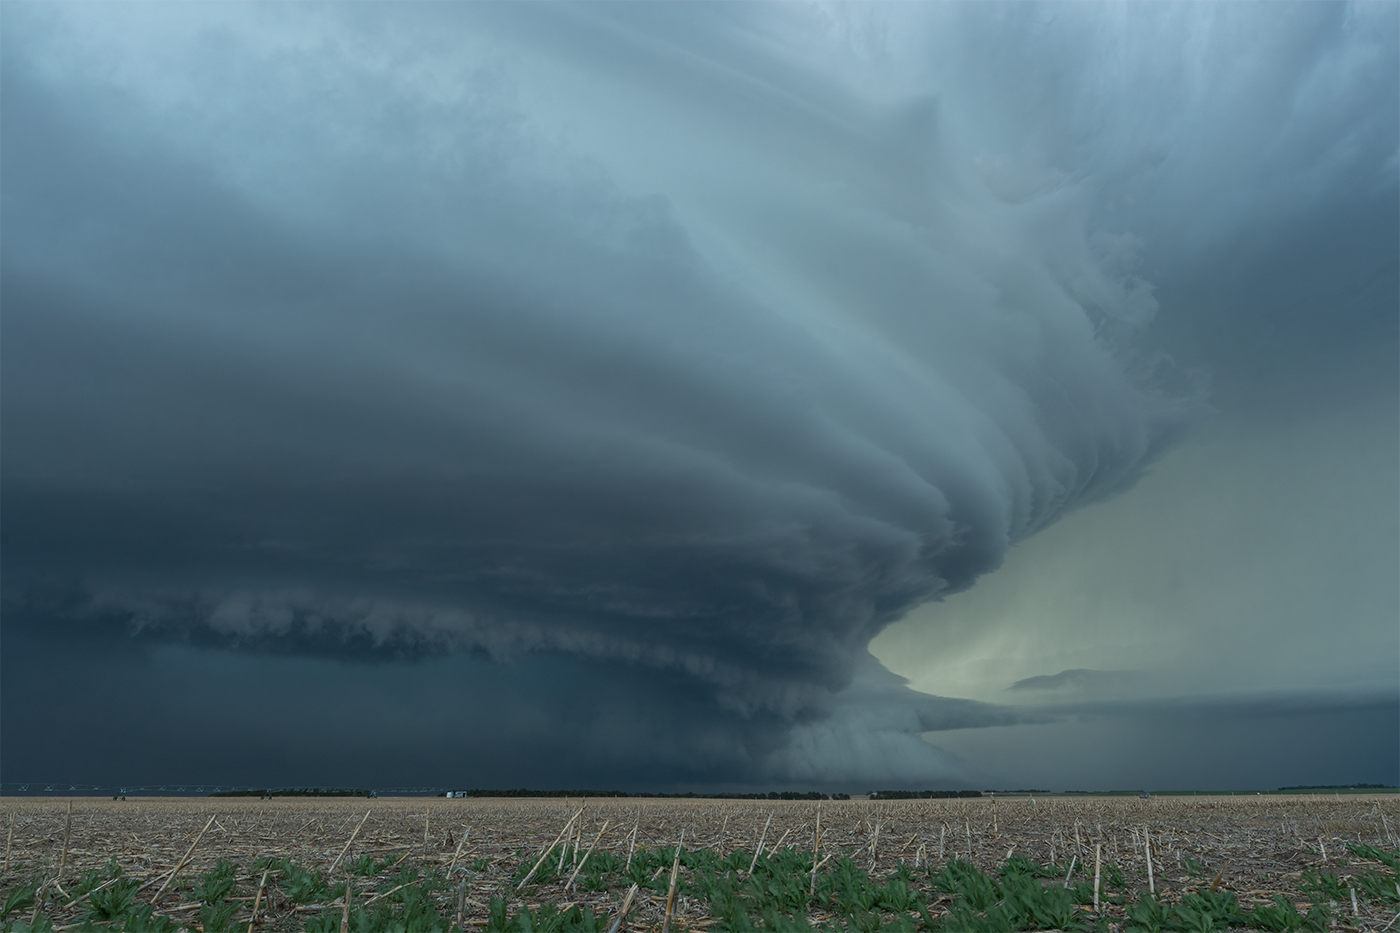 A magnificent sculpted supercell over Imperial, Nebraska